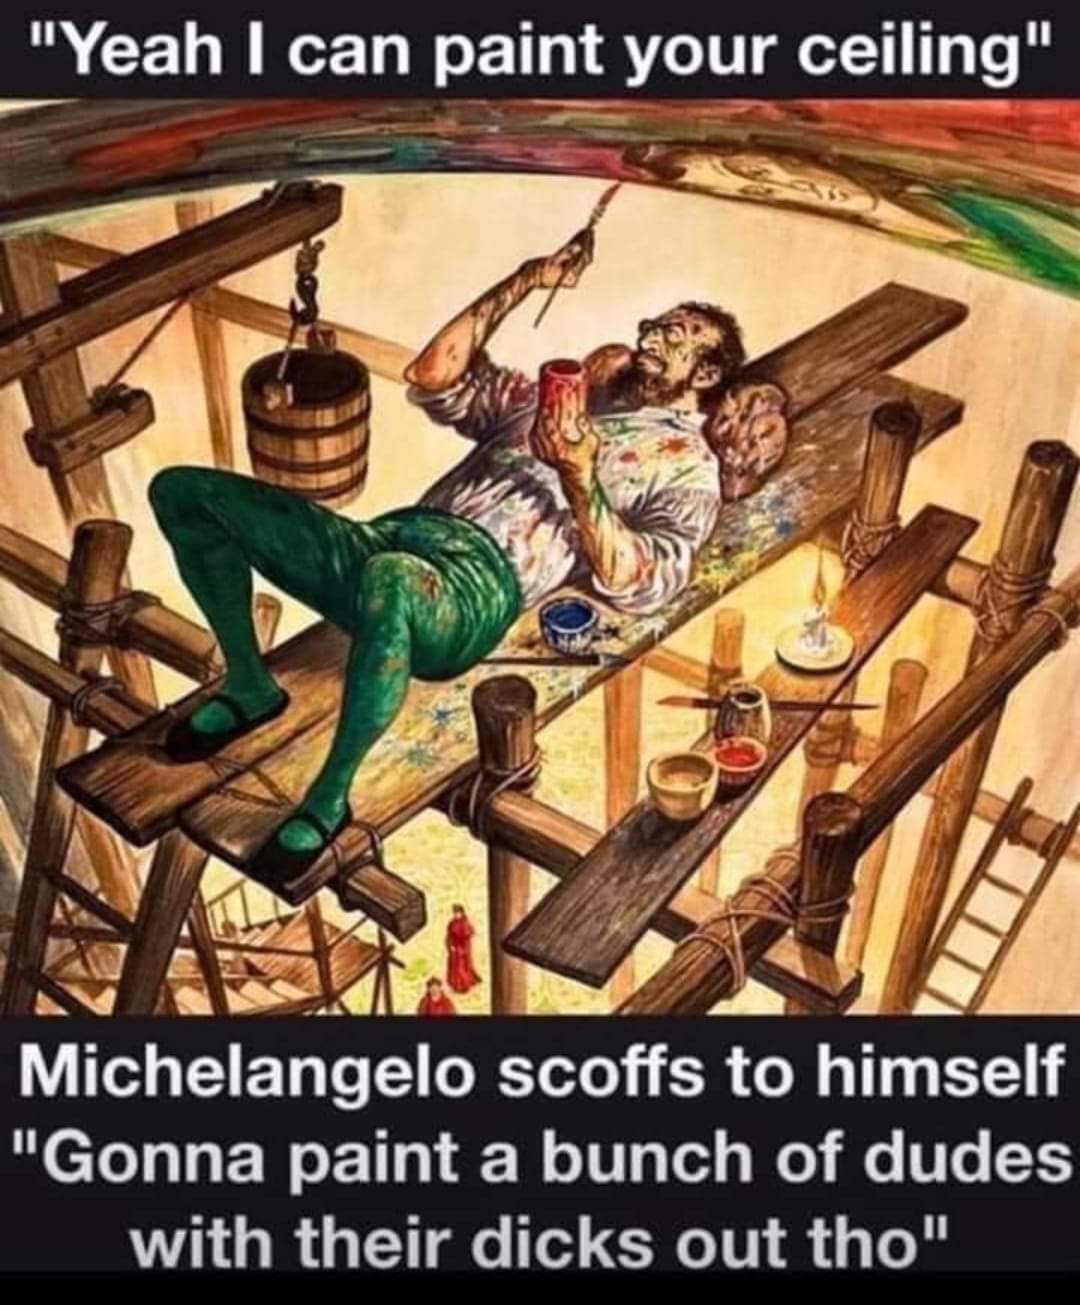 michelangelo painted the sistine chapel - "Yeah I can paint your ceiling" Michelangelo scoffs to himself "Gonna paint a bunch of dudes with their dicks out tho"